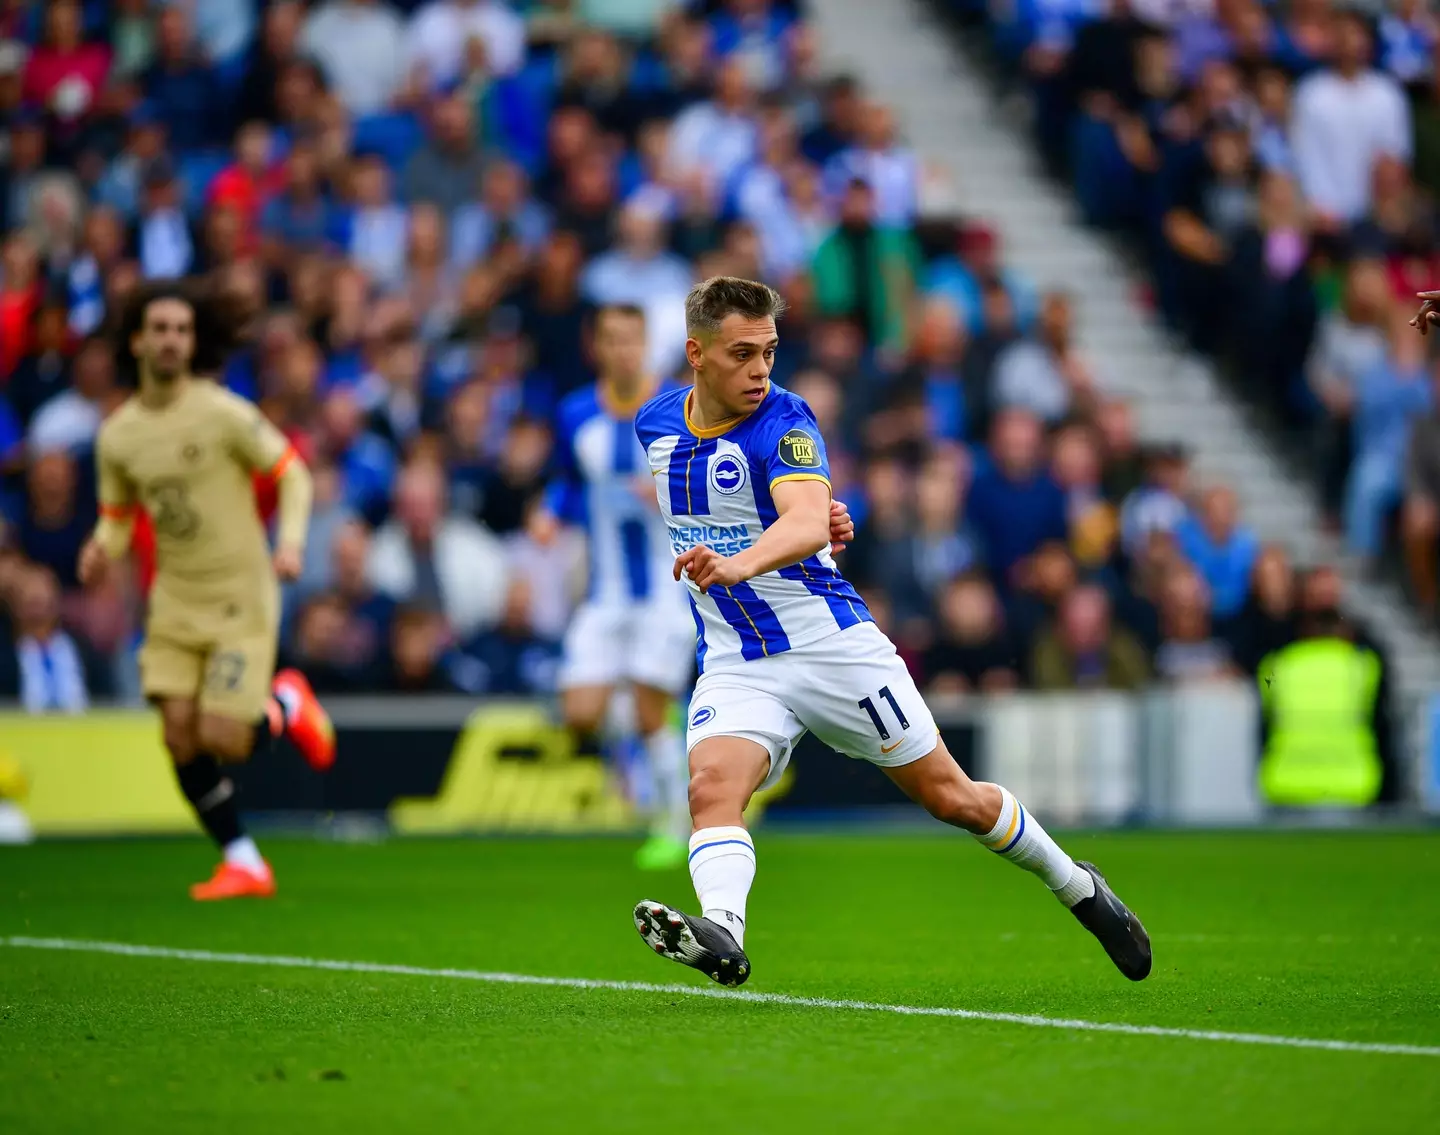 Leandro Trossard of Brighton and Hove Albion makes a run to score the opening goal during the Premier League match between Brighton & Hove Albion and Chelsea. (Alamy)